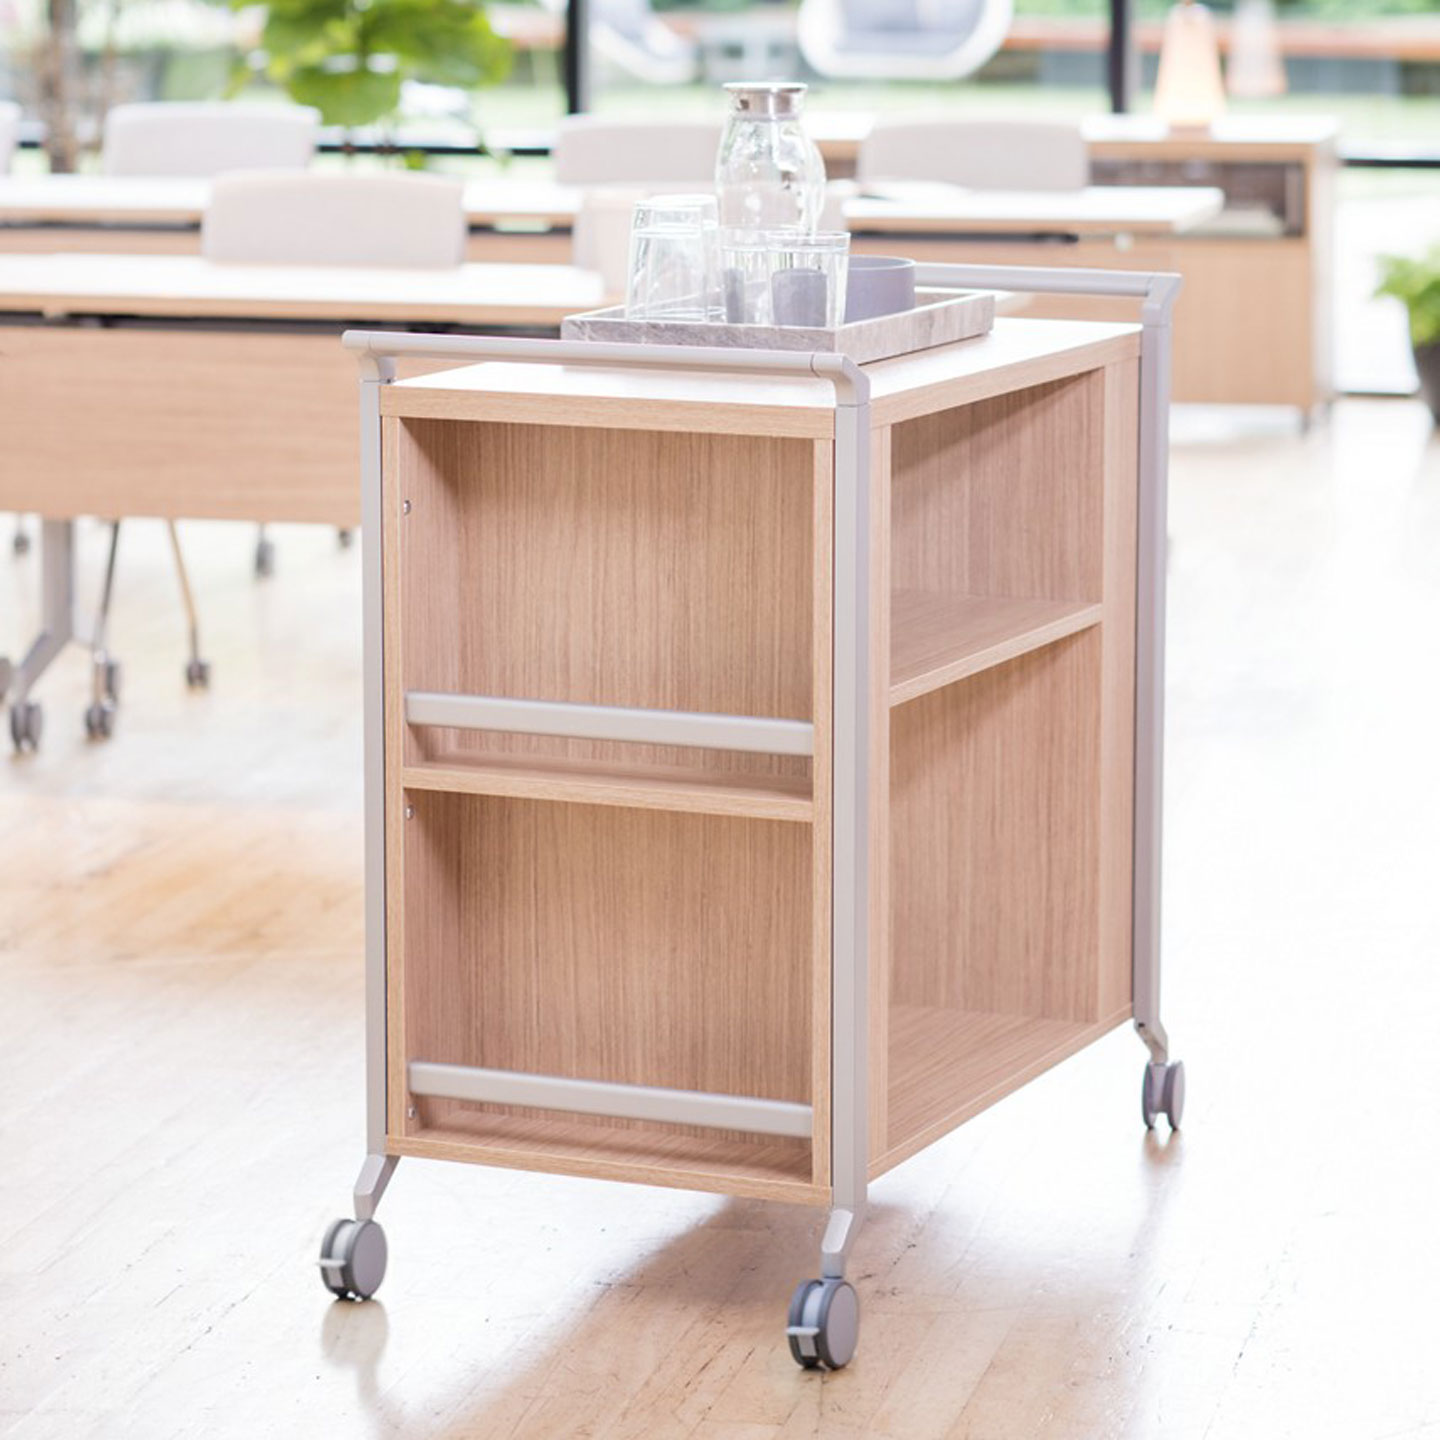 Haworth Planes Accessories wooden cart in office space with water on top of it 